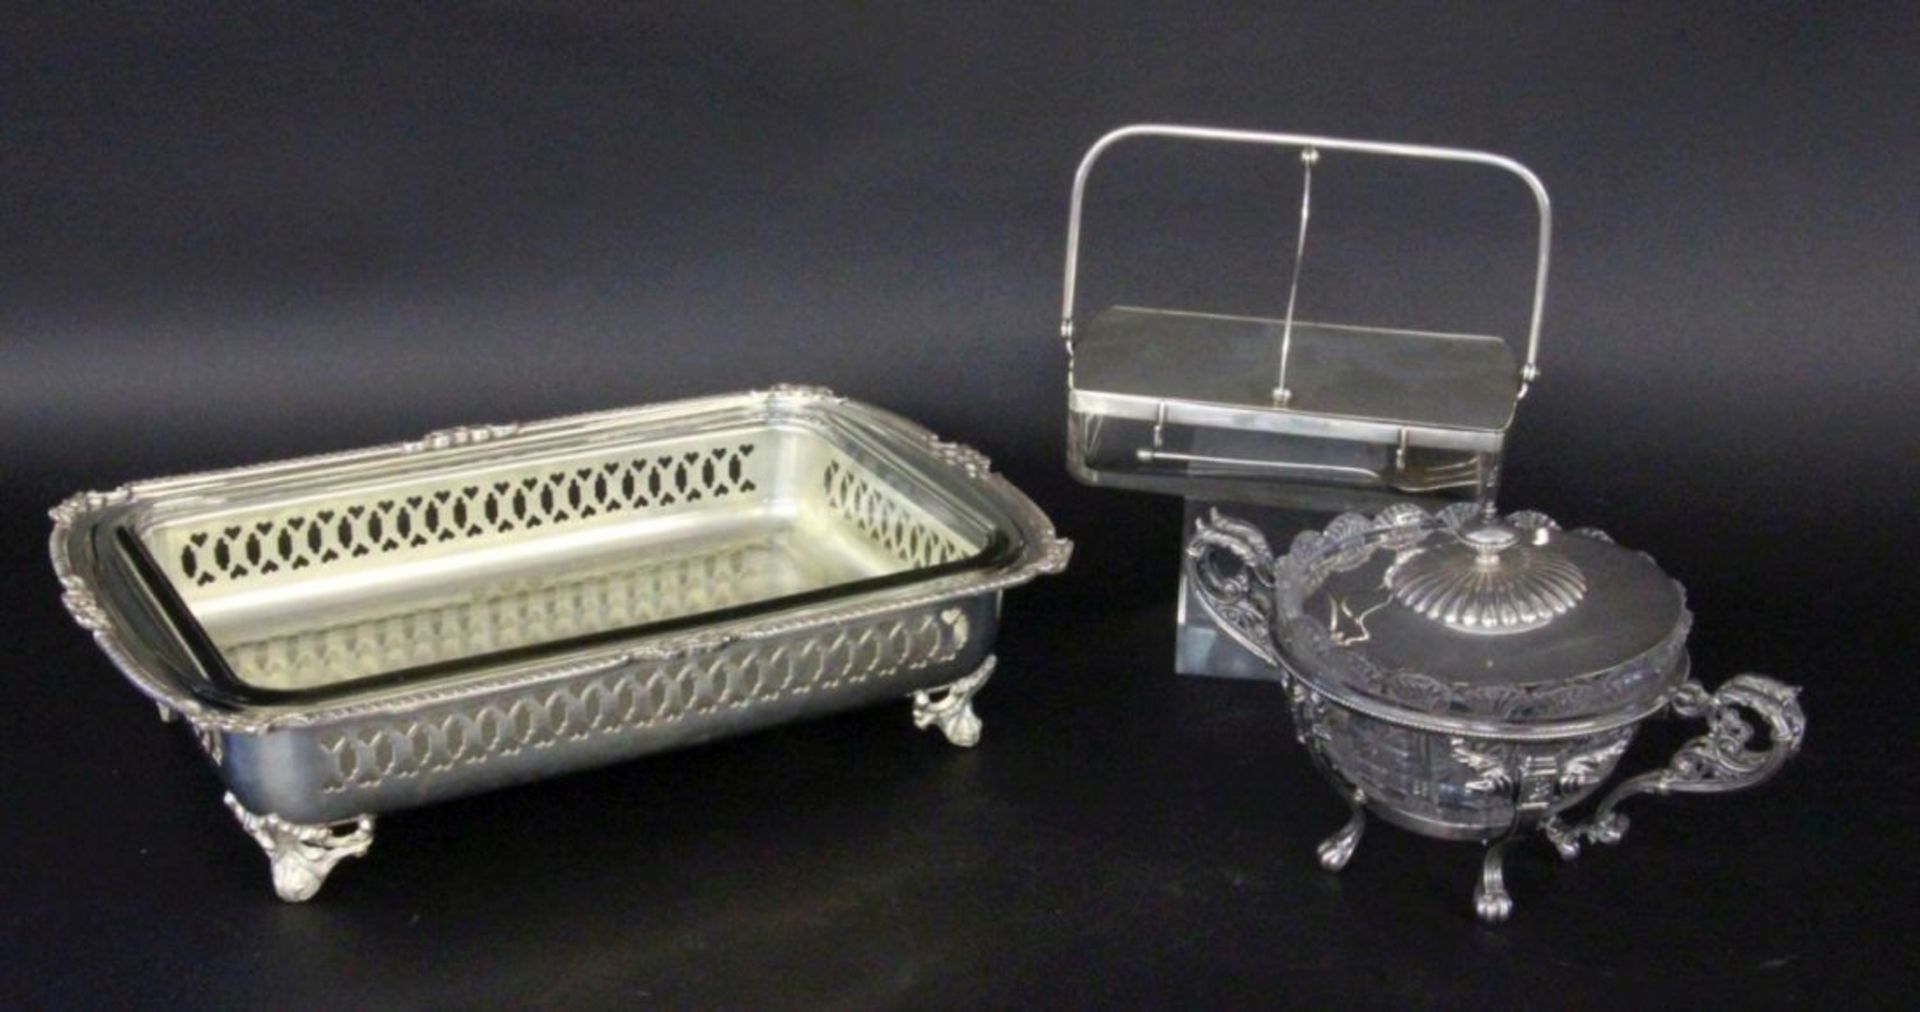 2 CONFECTION BOXES AND DISH TRAY Silver-plated metal with glass insets. Maximum length 32